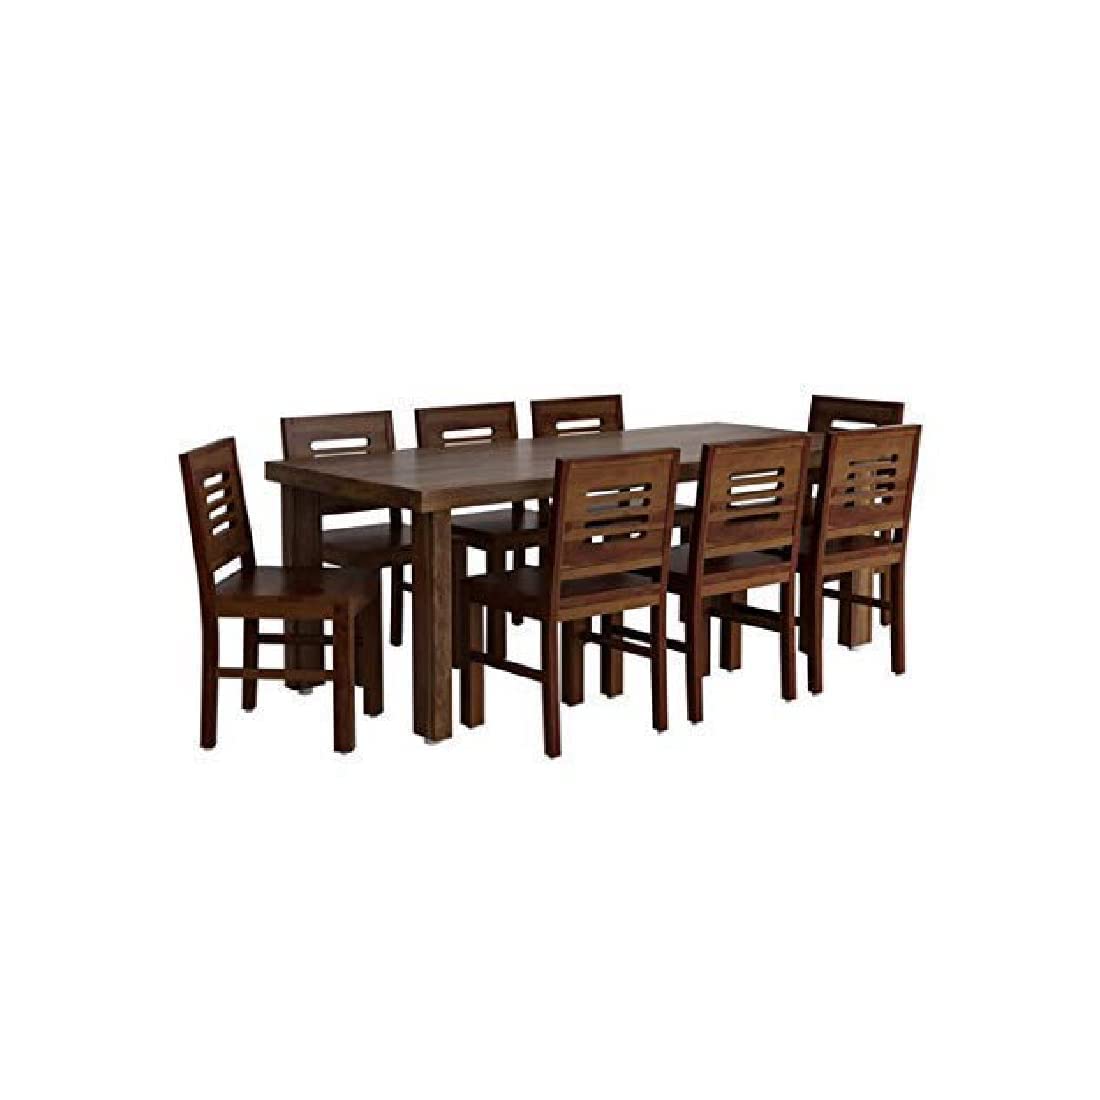 MoonWooden Solid Wood 8 Seater Dining Table Set with 8 Chair for Home & Office Furniture| Hotel & Dinner | Drawing Room Furniture | with Dark Walnut Finish